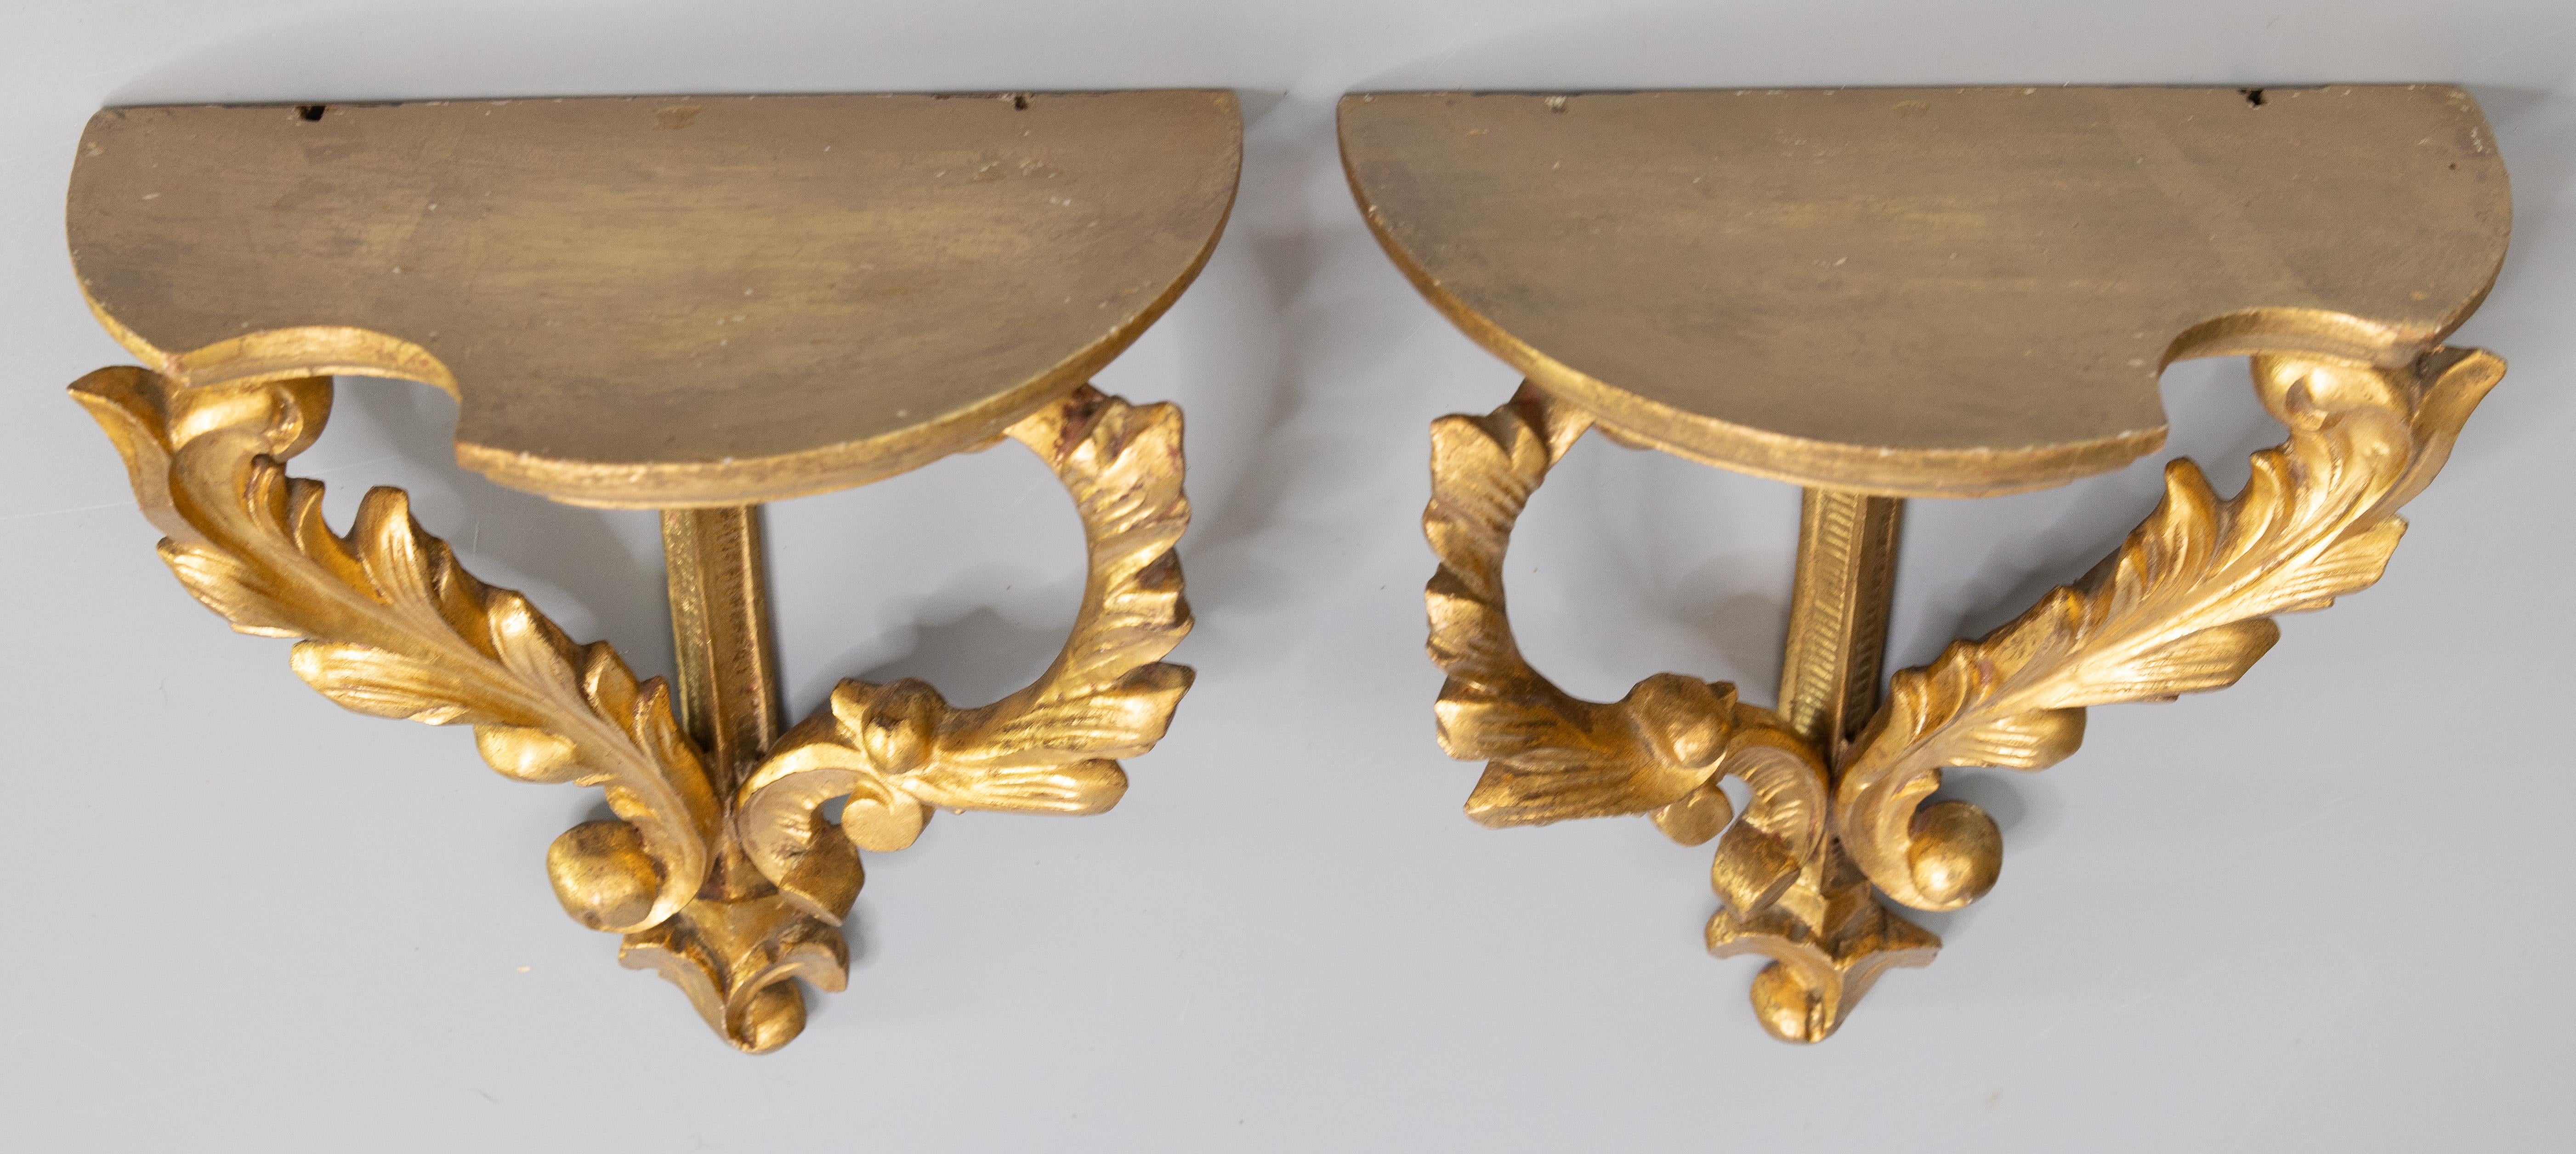 Pair of Mid-20th Century Italian Carved Giltwood Wall Brackets Shelves 1